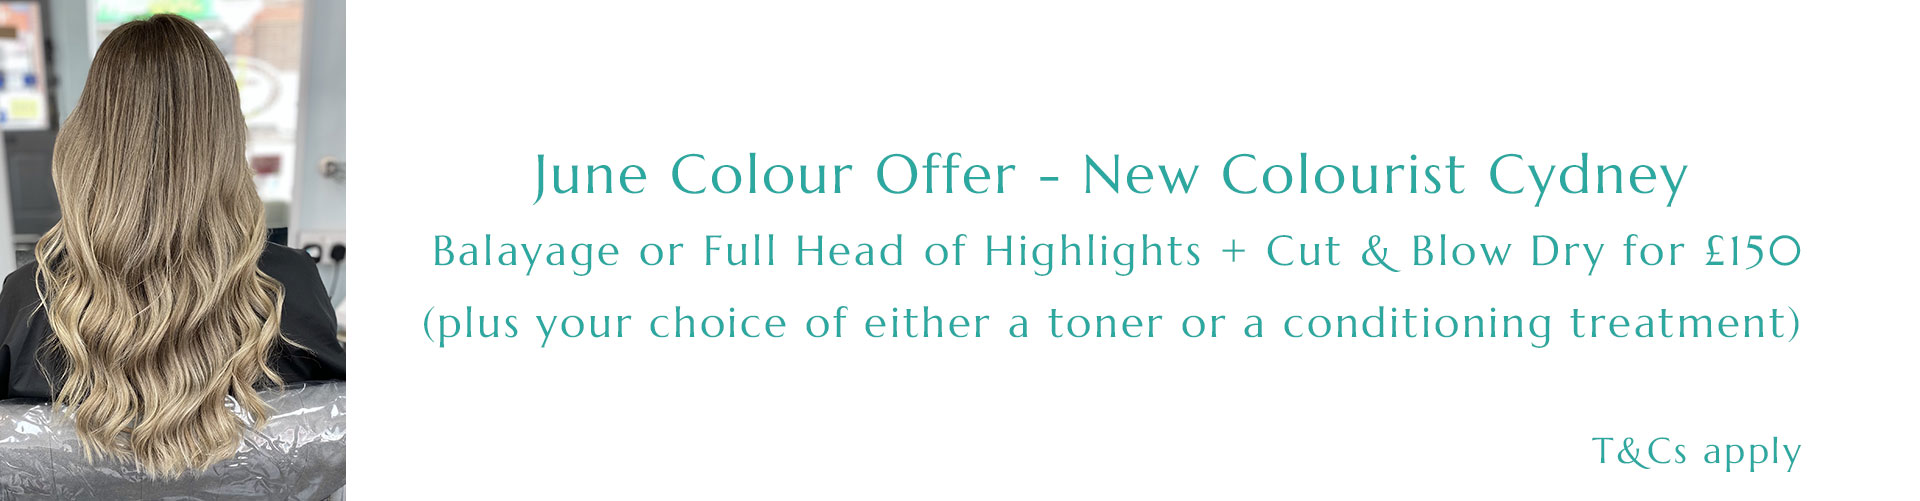 June Colour Offer Balayage or Highlights Cut Blow DryOnly at Segais Beauty Salon in Wantage